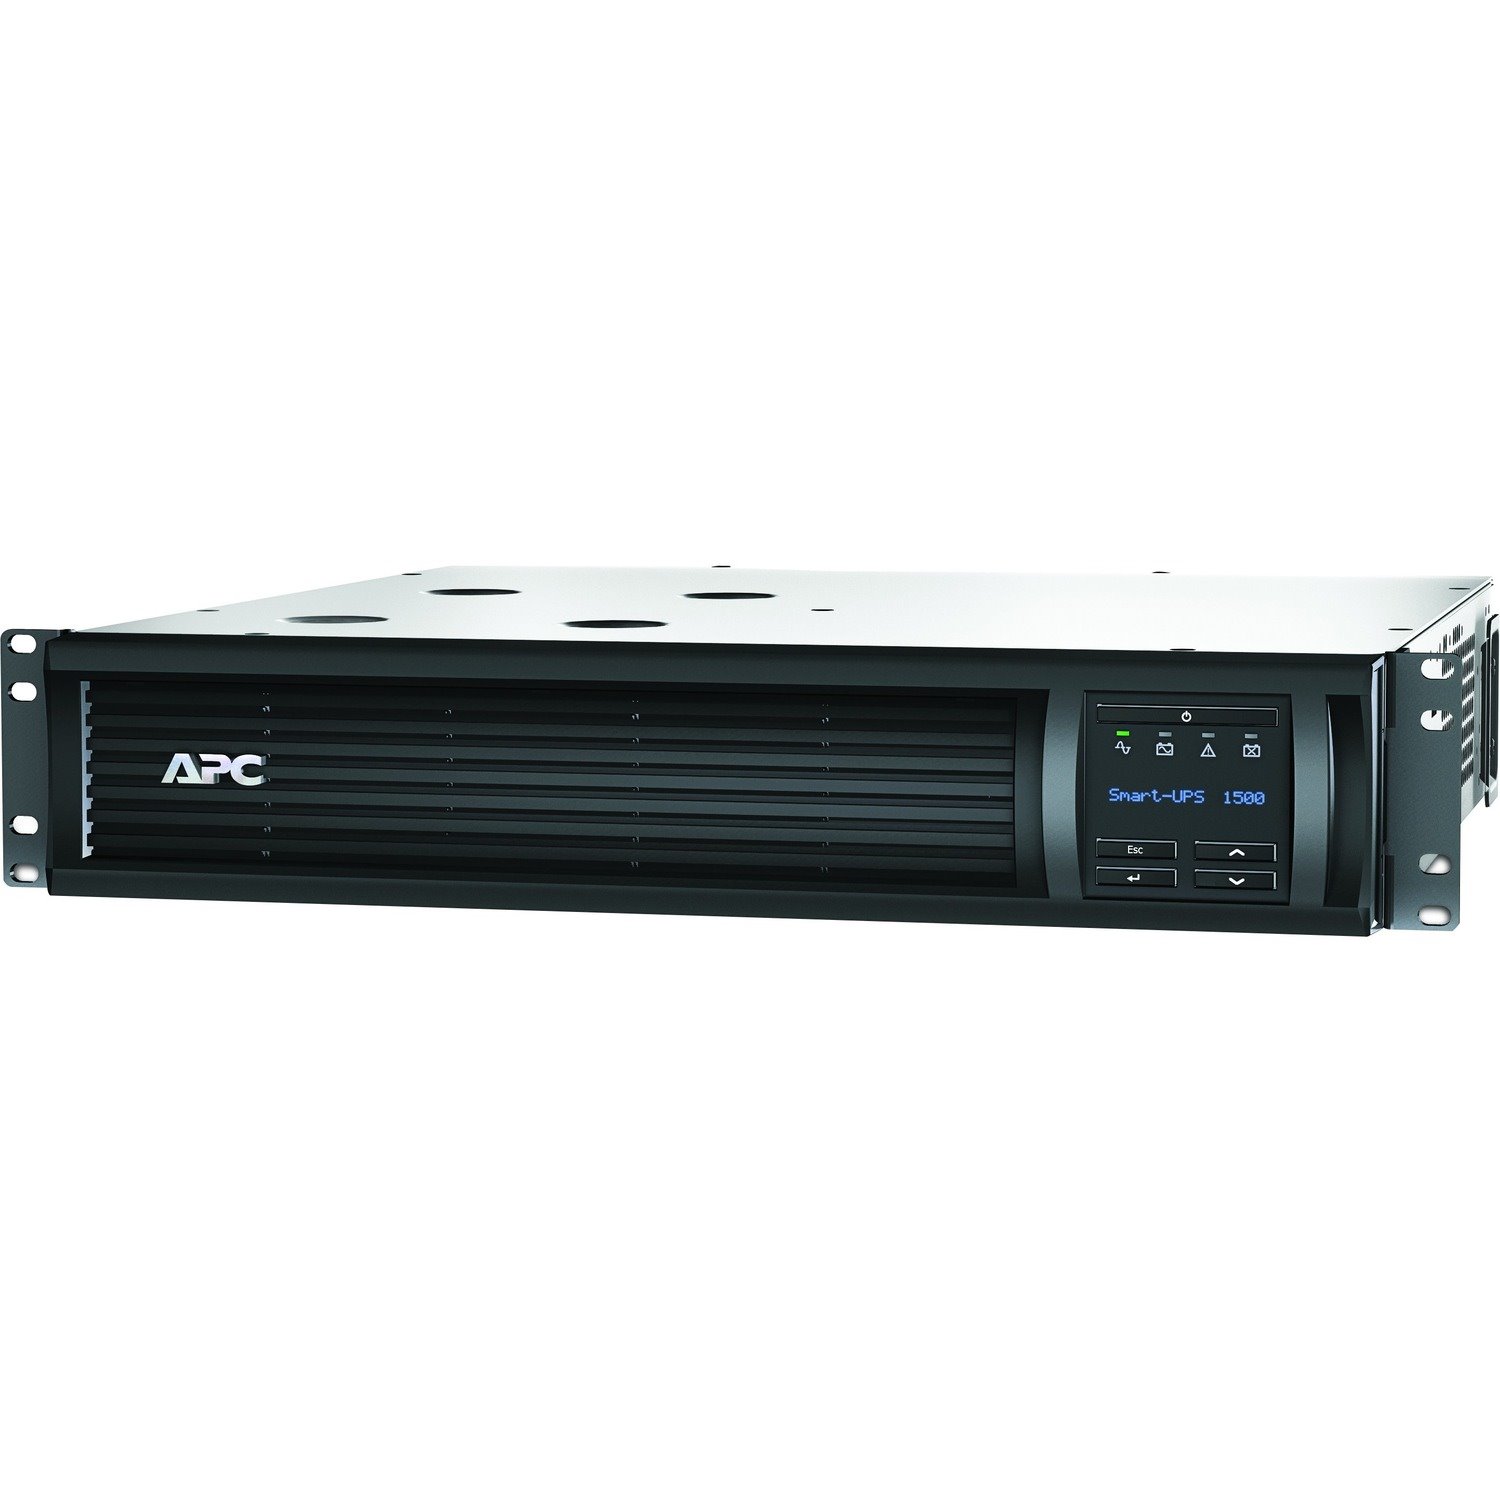 SMT1500RMI2UC - APC by Schneider Electric Smart-UPS Line-interactive UPS - 1.5kVA / 1kW with Smart Connect Cloud Monitoring